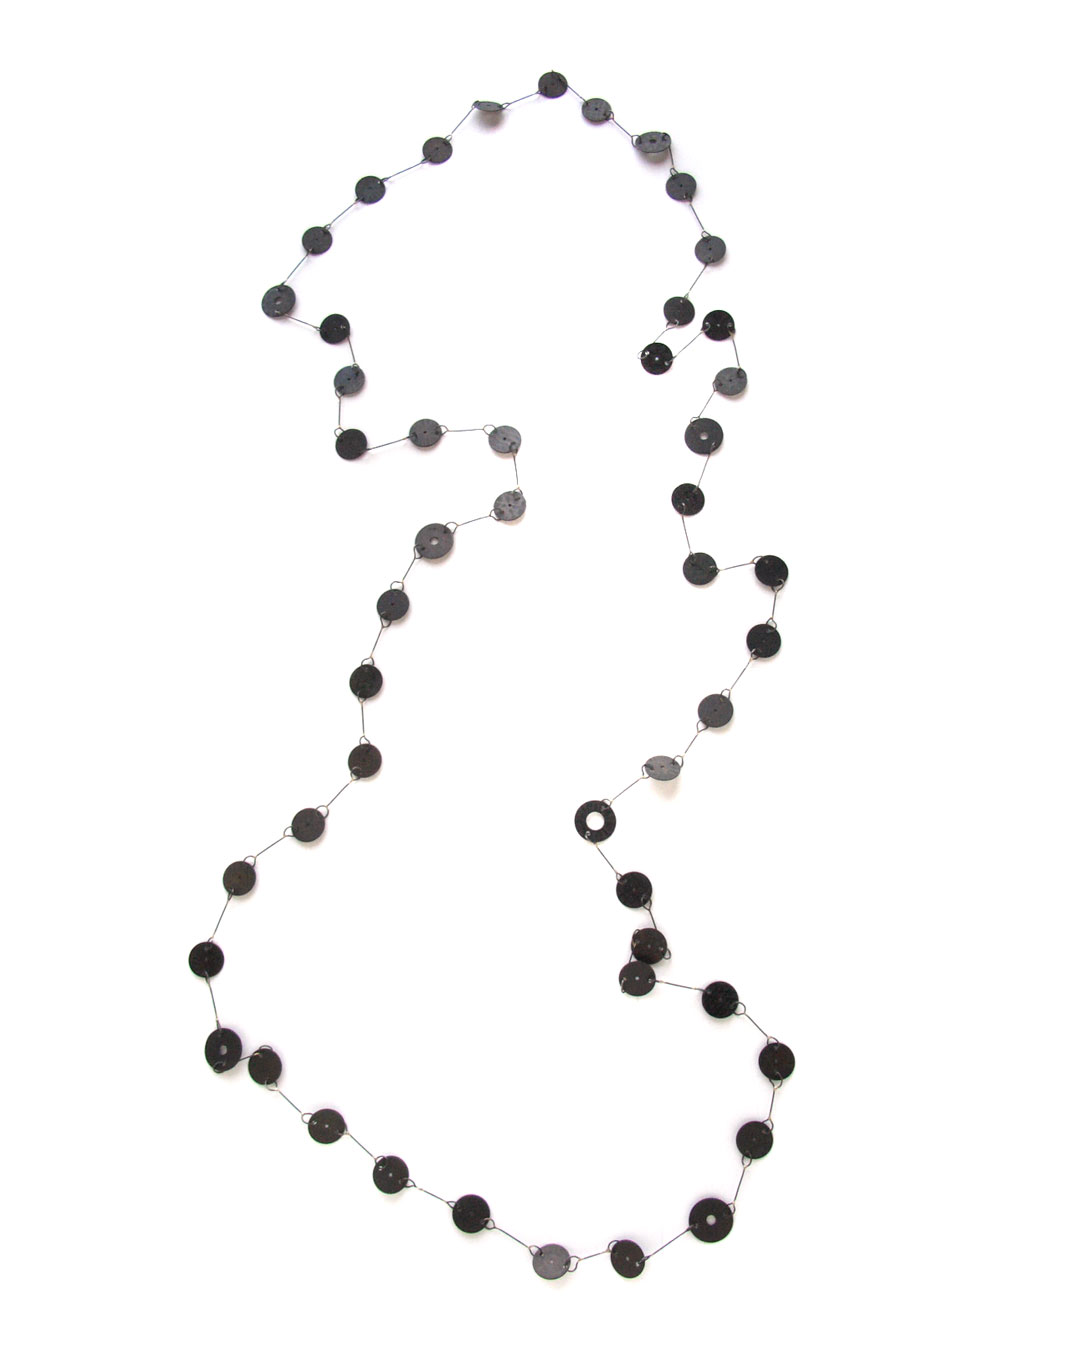 Tore Svensson, untitled, 2006, necklace; steel, 600 x 1.5 mm, €1100